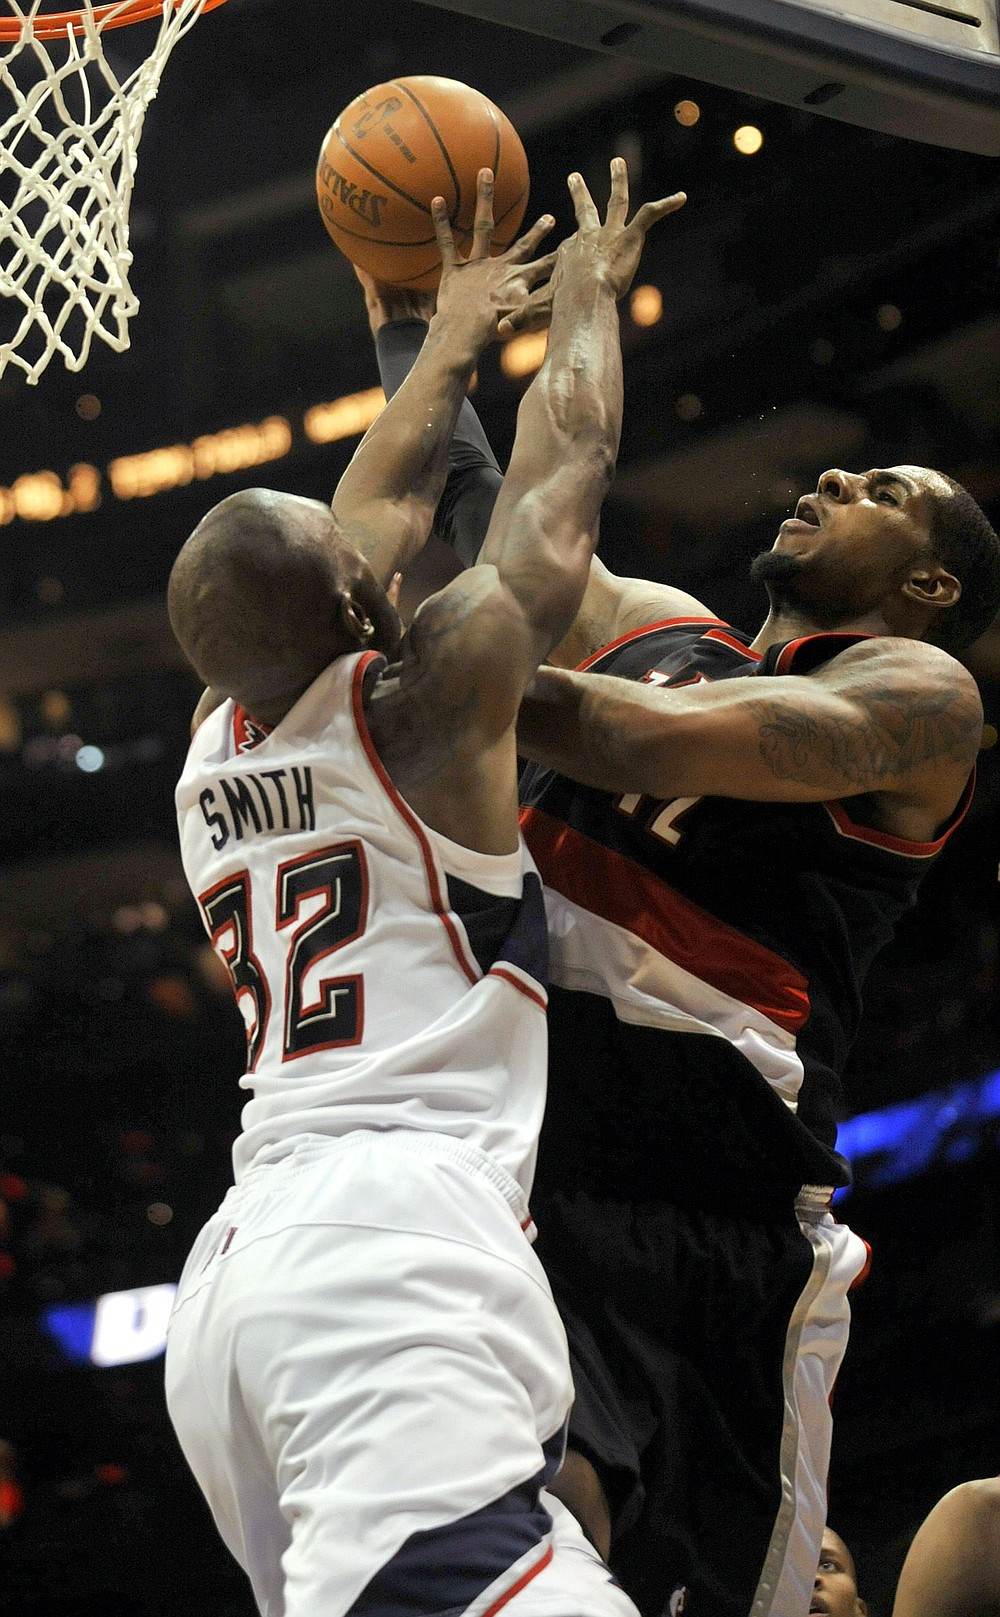 Gregory SmitH/The Associated Press
Atlanta's Joe Smith (32) fouls Trail Blazers forward LaMarcus Aldridge during the Hawks' 99-95 win over Portland on Monday. Aldridge finished with 18 points as the Blazers lost in overtime.